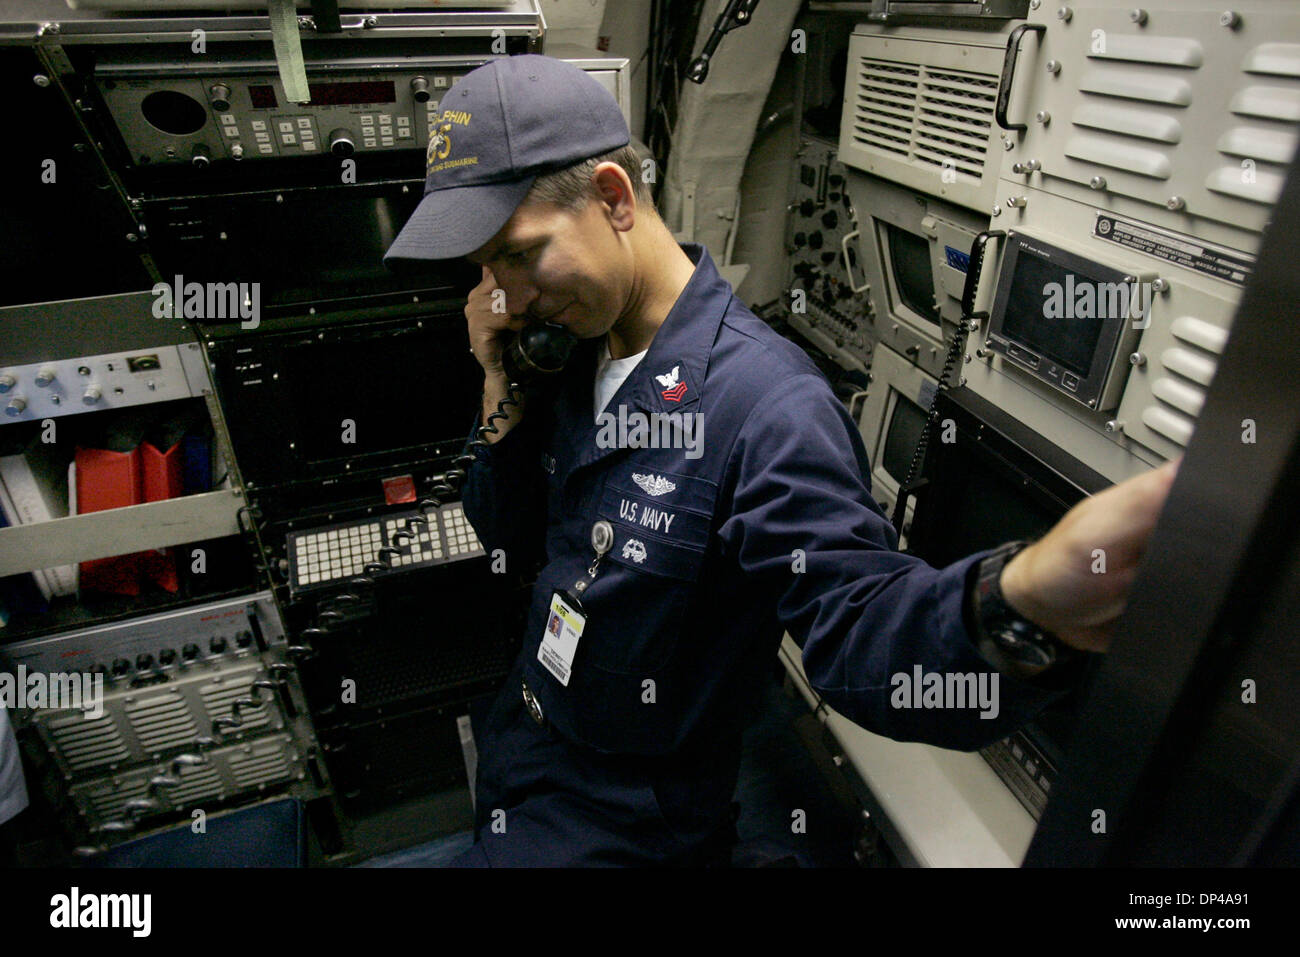 Aug 02, 2006; San Diego, CA, USA; US Navy  First Class DEW BARTHOLOMEUS, in the Sonar Shack on the USS Dolphin, the US Navy's last Diesel Electric Submarine. The Submarine calls Naval Base Point Loma home and is scheduled to be decommissioned later this year. This after the completion of a recent $50 million repair and upgrade.   Mandatory Credit: Photo by Howard Lipin/SDU-T/ZUMA P Stock Photo